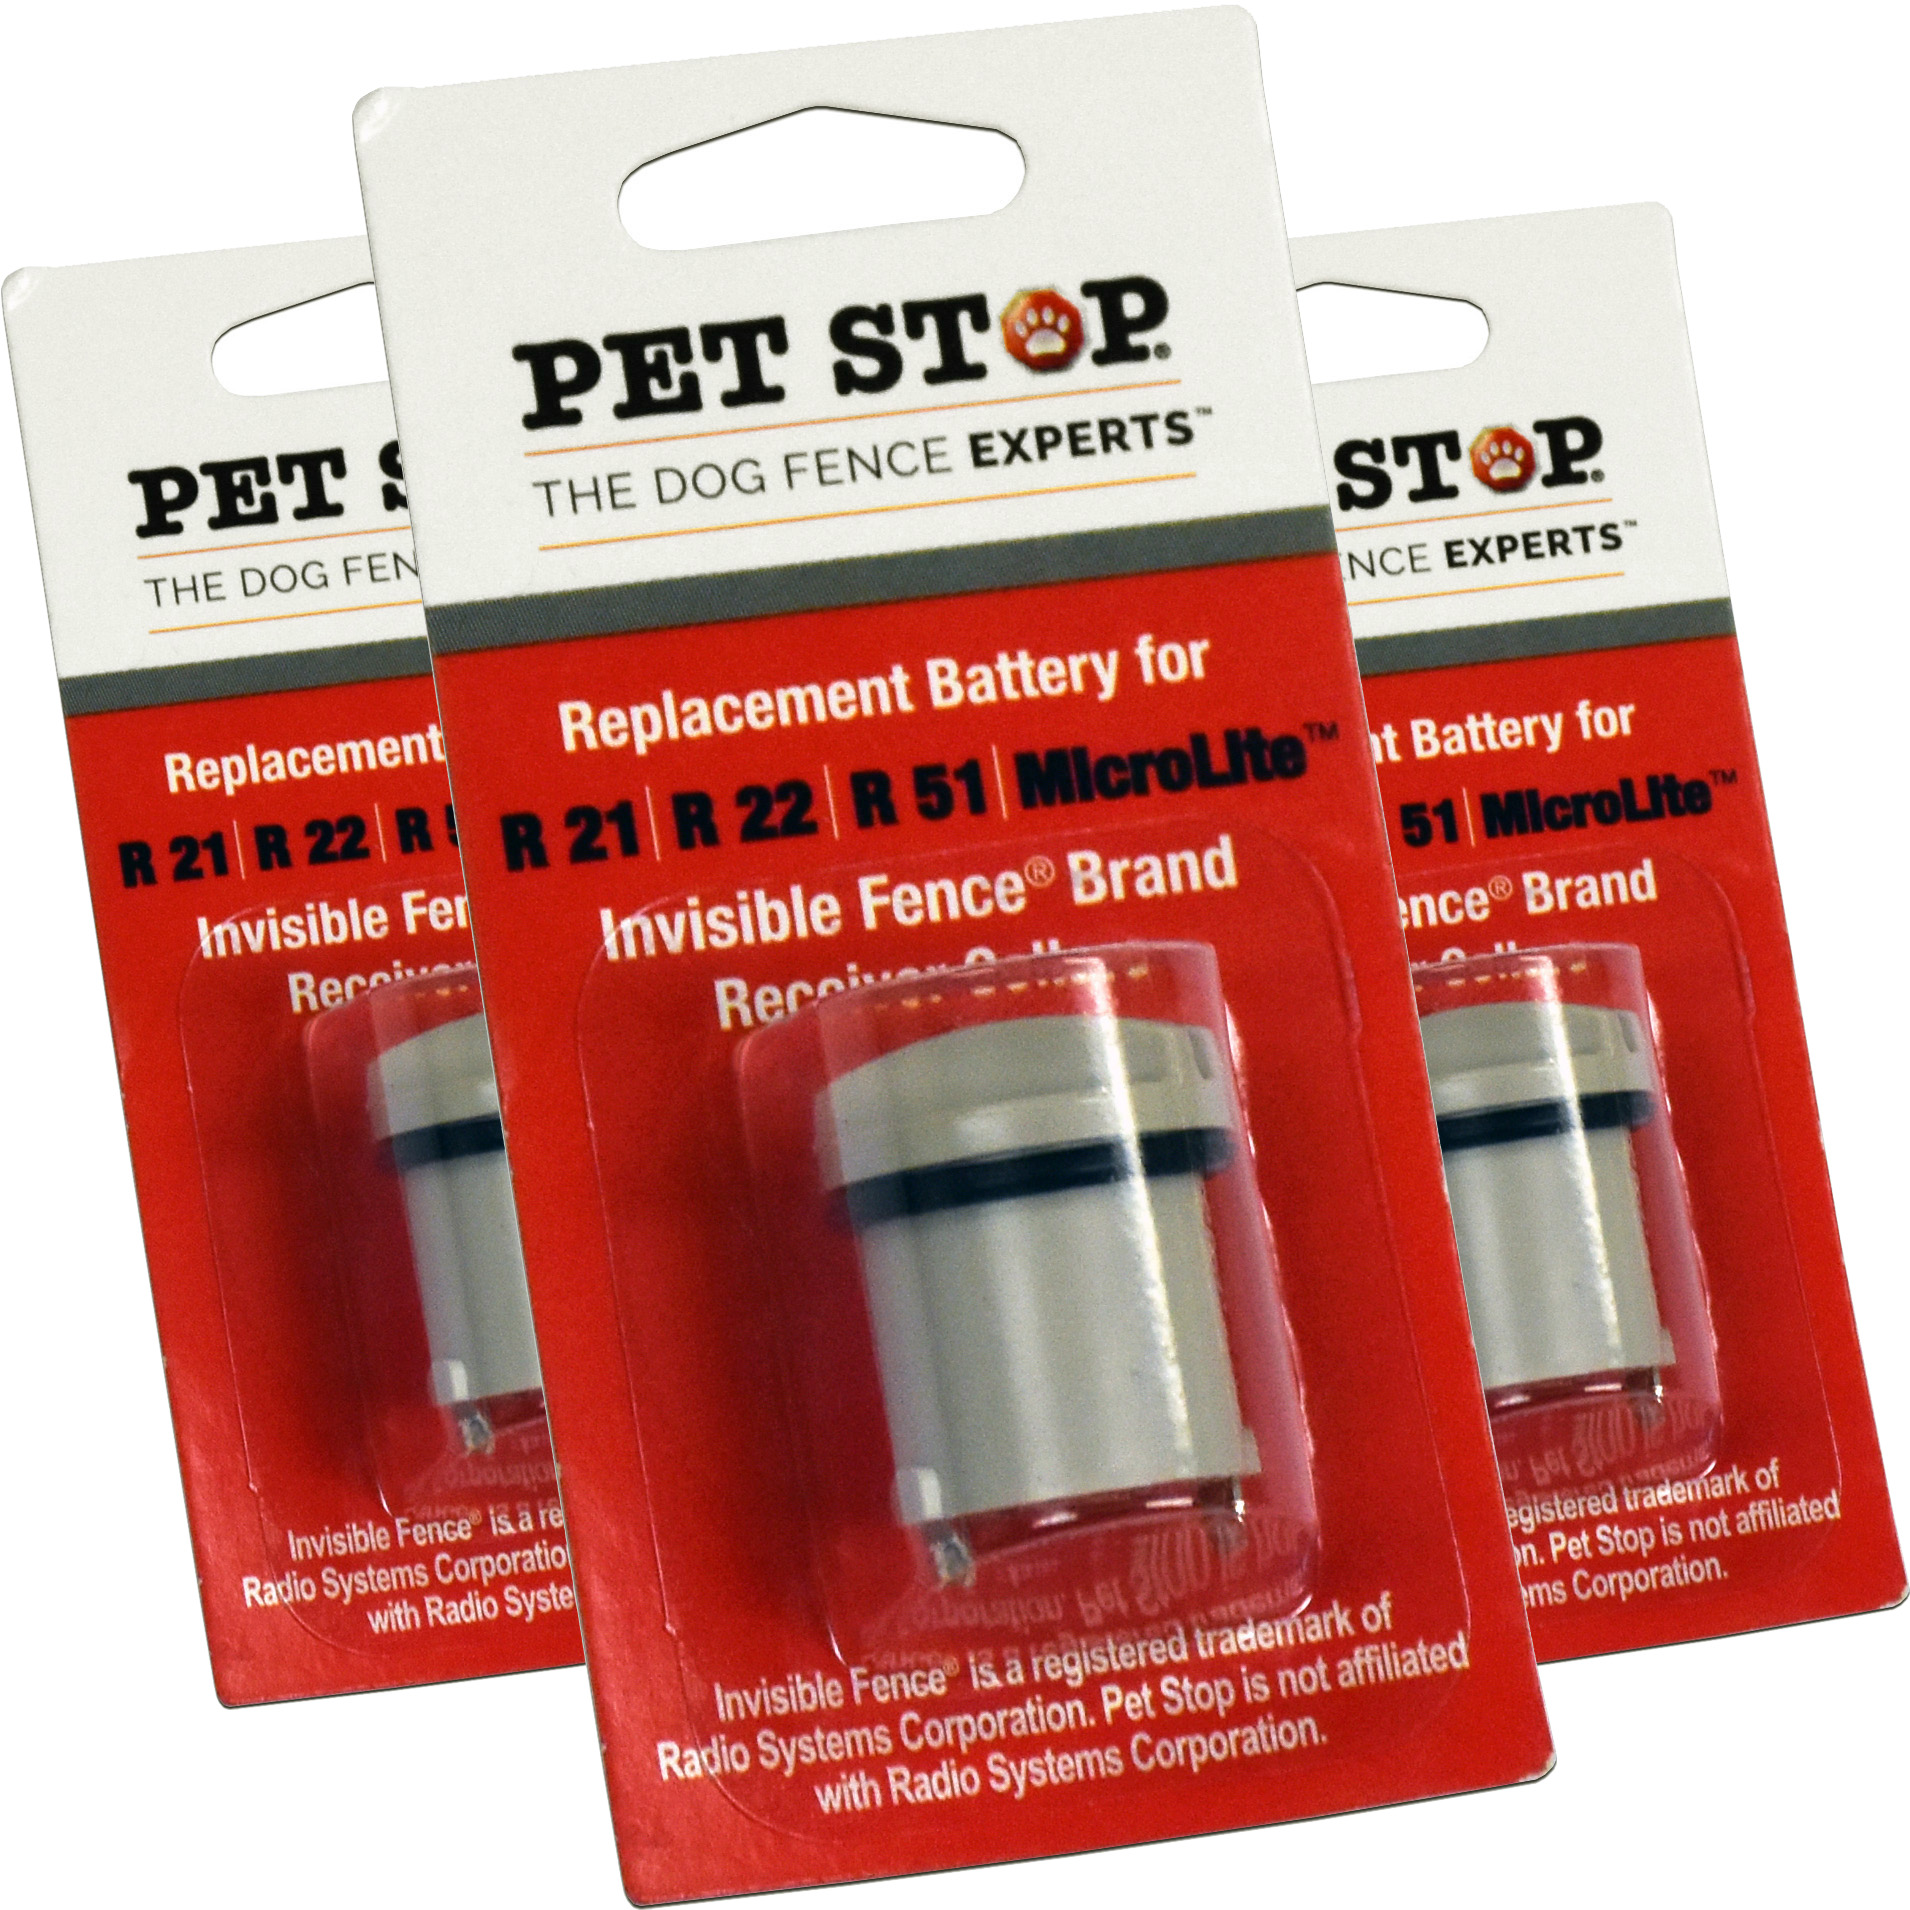 Invisible Fence® Brand Replacement Battery, Three Pack